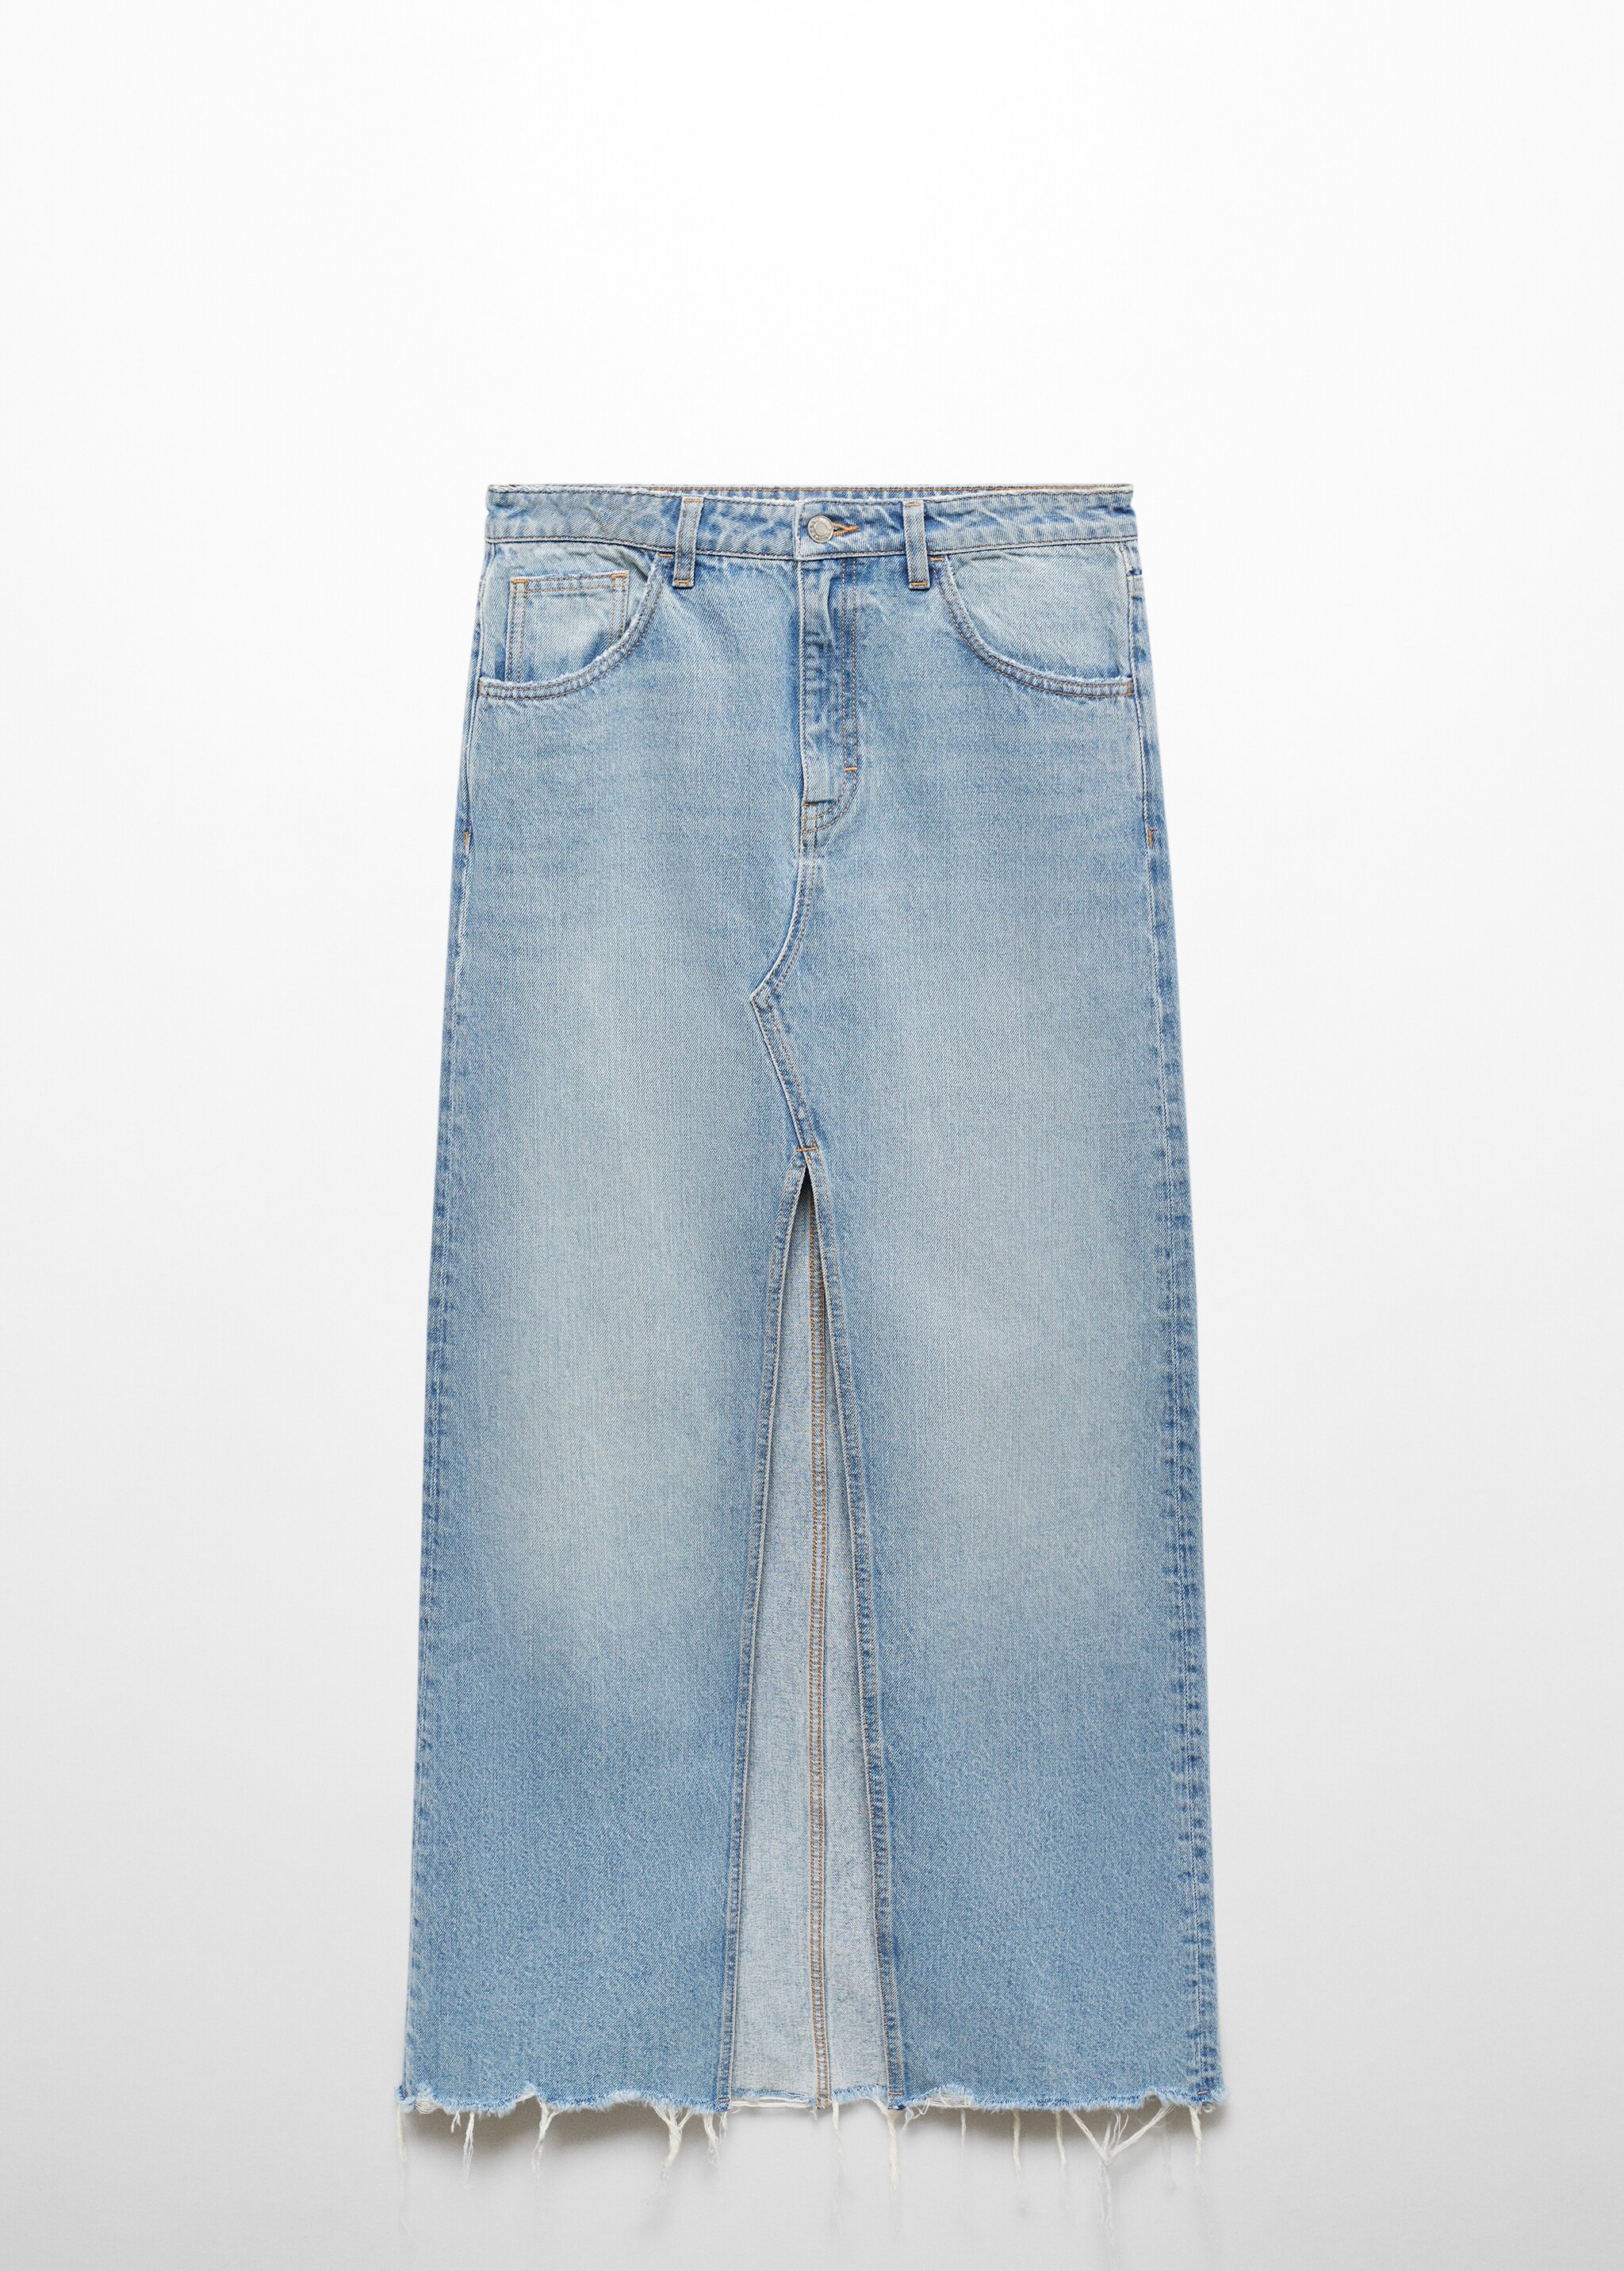 Denim skirt with frayed hem - Article without model